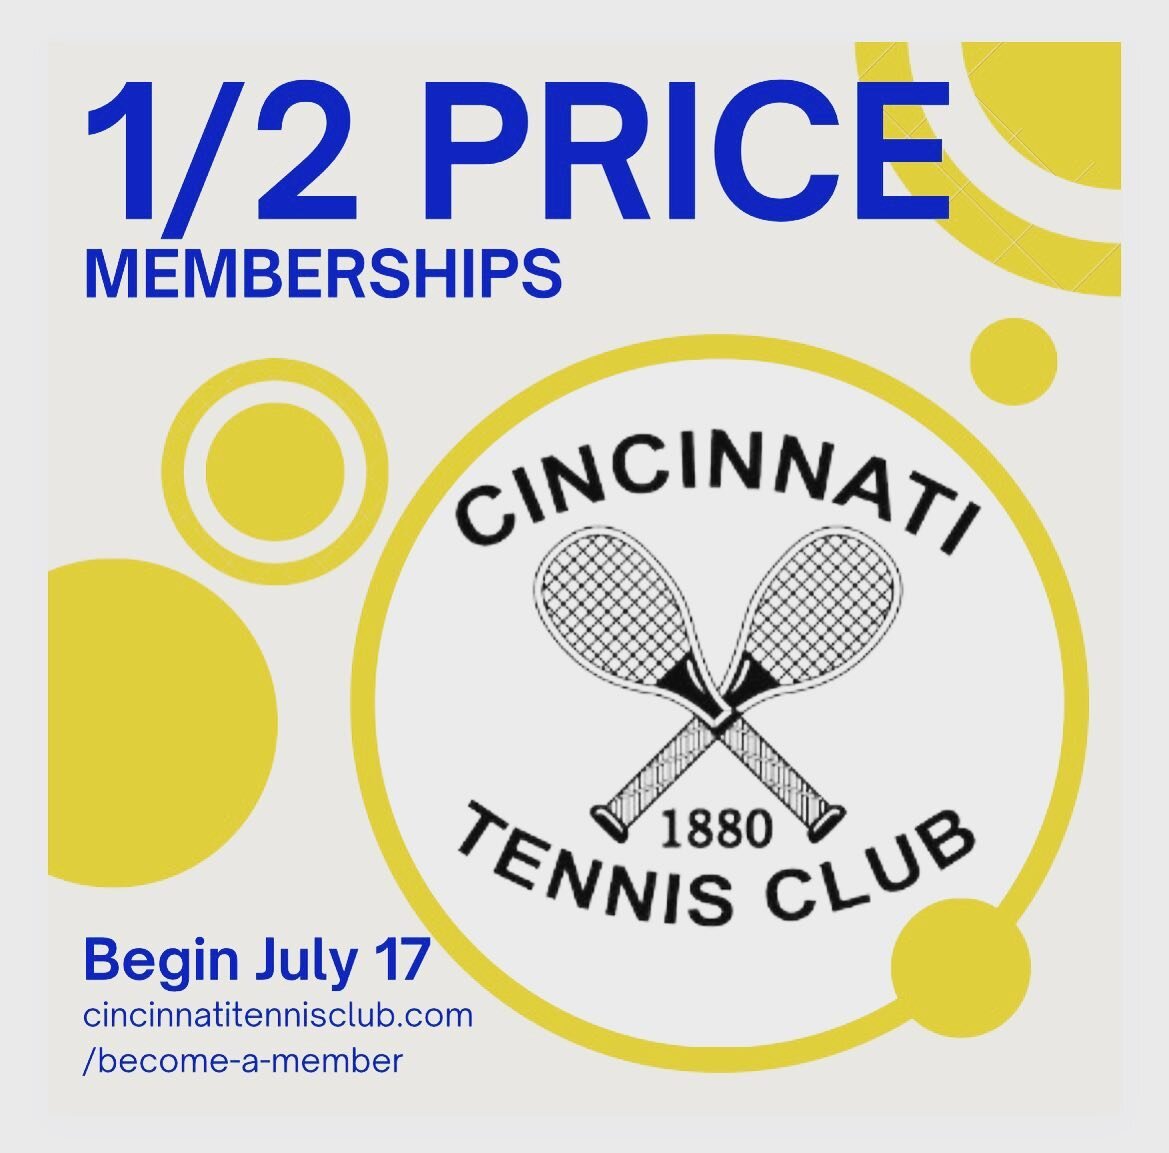 We are half way through our season @ctc1880. That means memberships are half off beginning NOW! Check out our website for membership pricing: cincinnatitennisclub.com 🎾